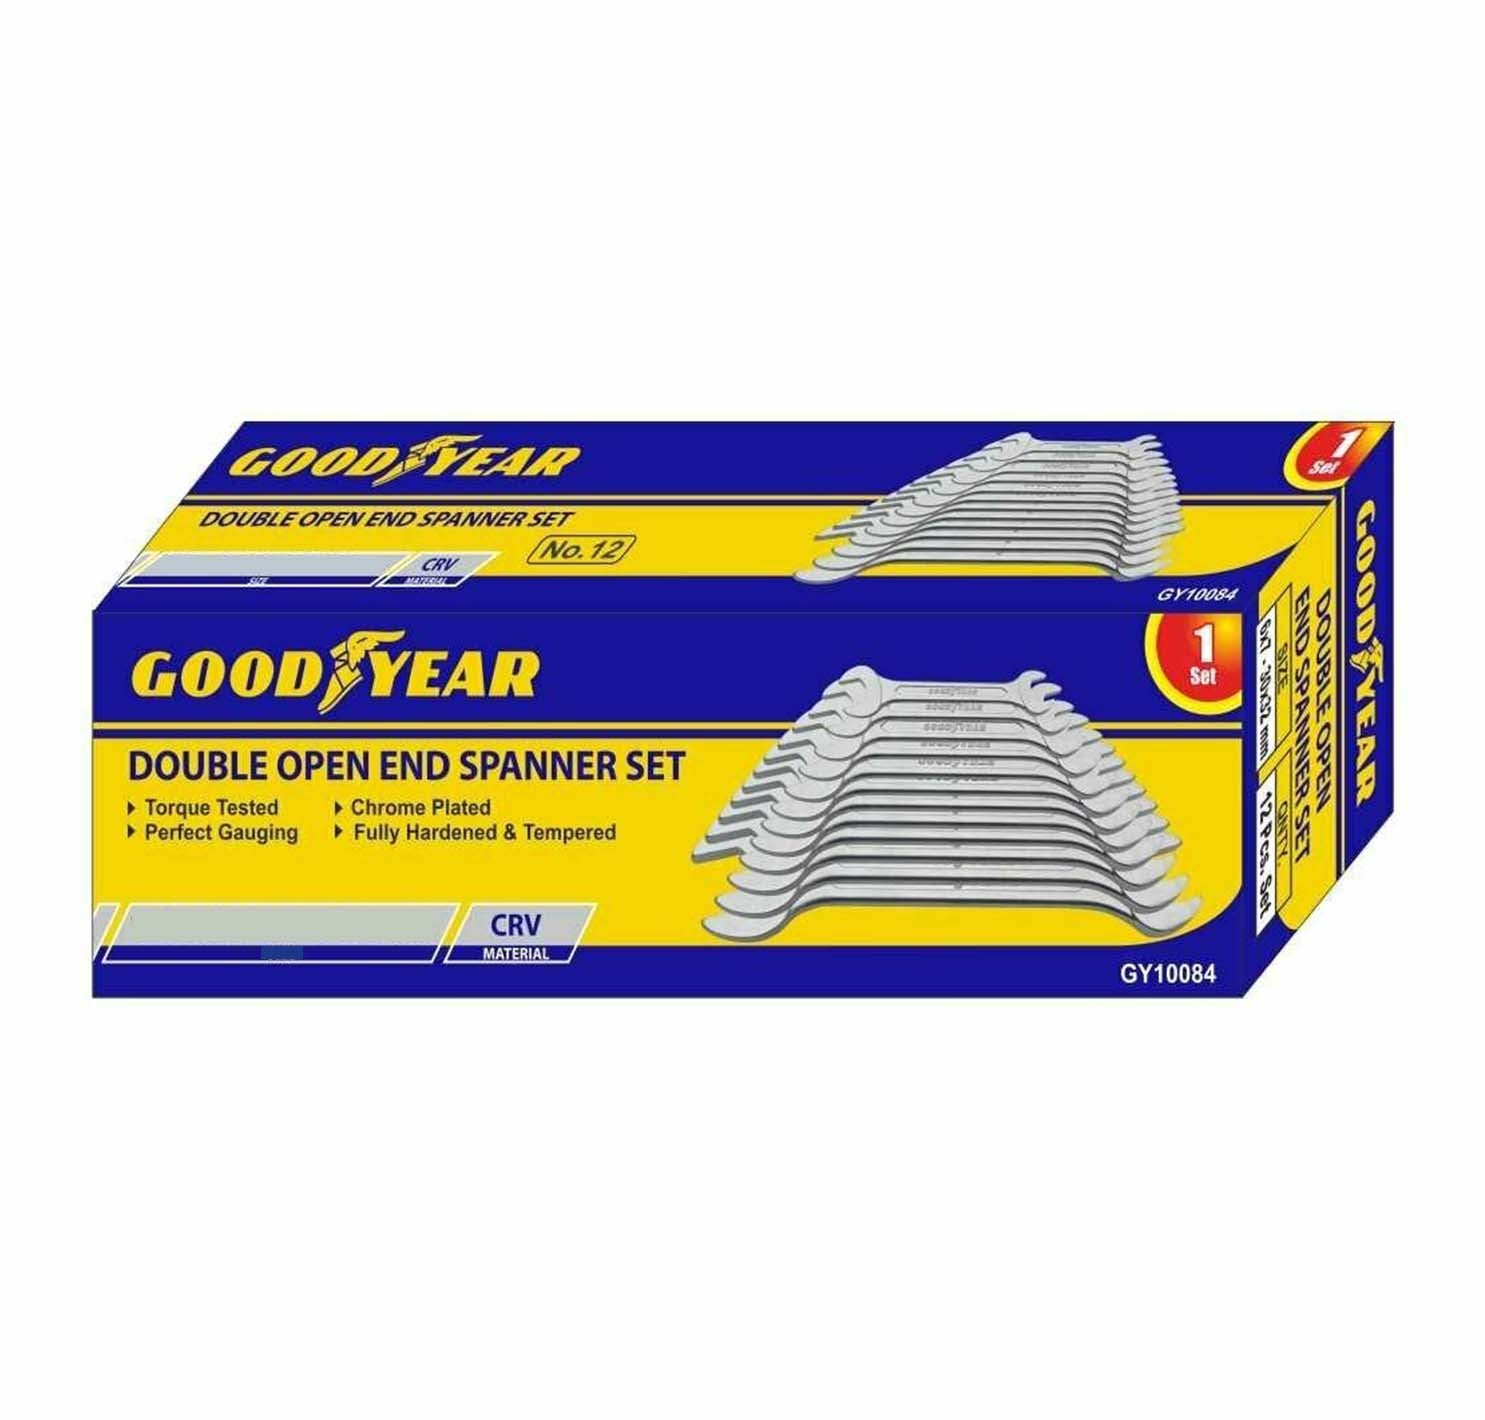 Goodyear Double Open End Spanner Set - Box Packing